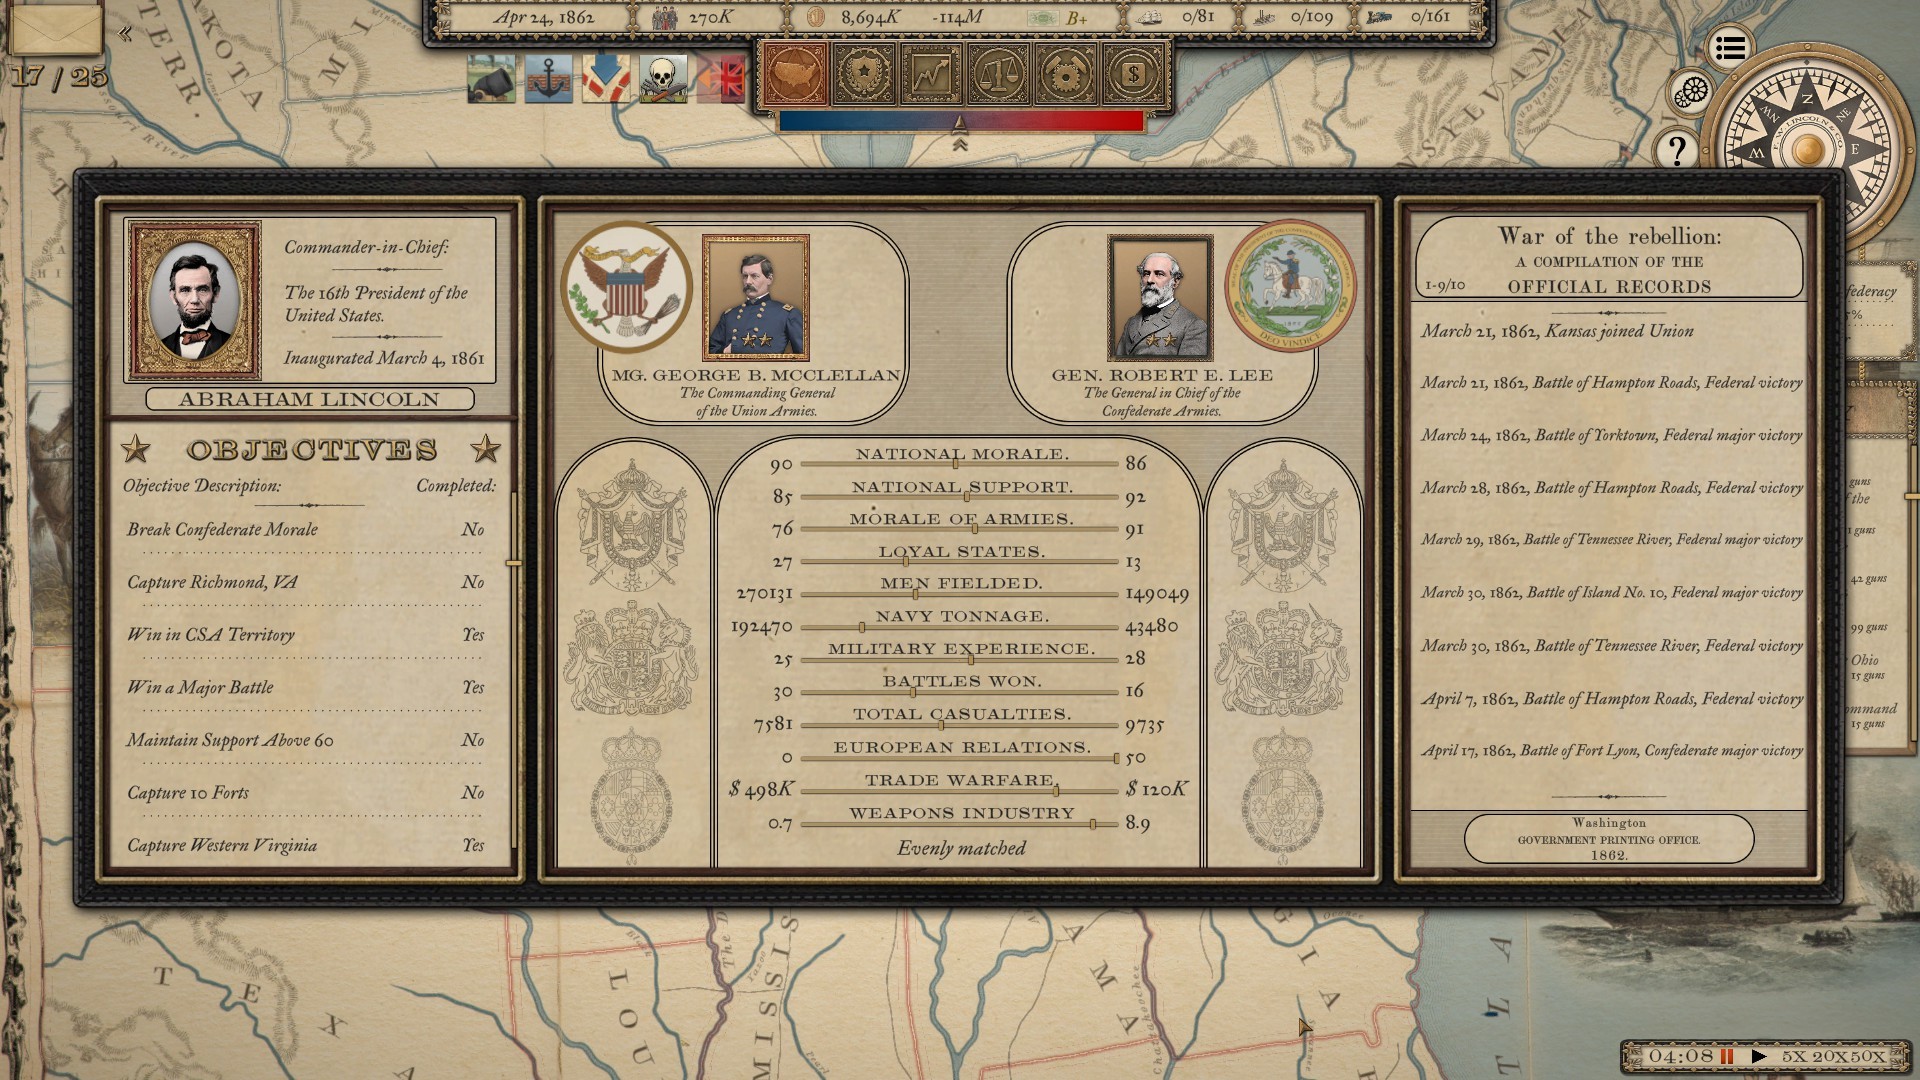 Grand Tactician: The Civil War (1861-1865) Free Download for PC